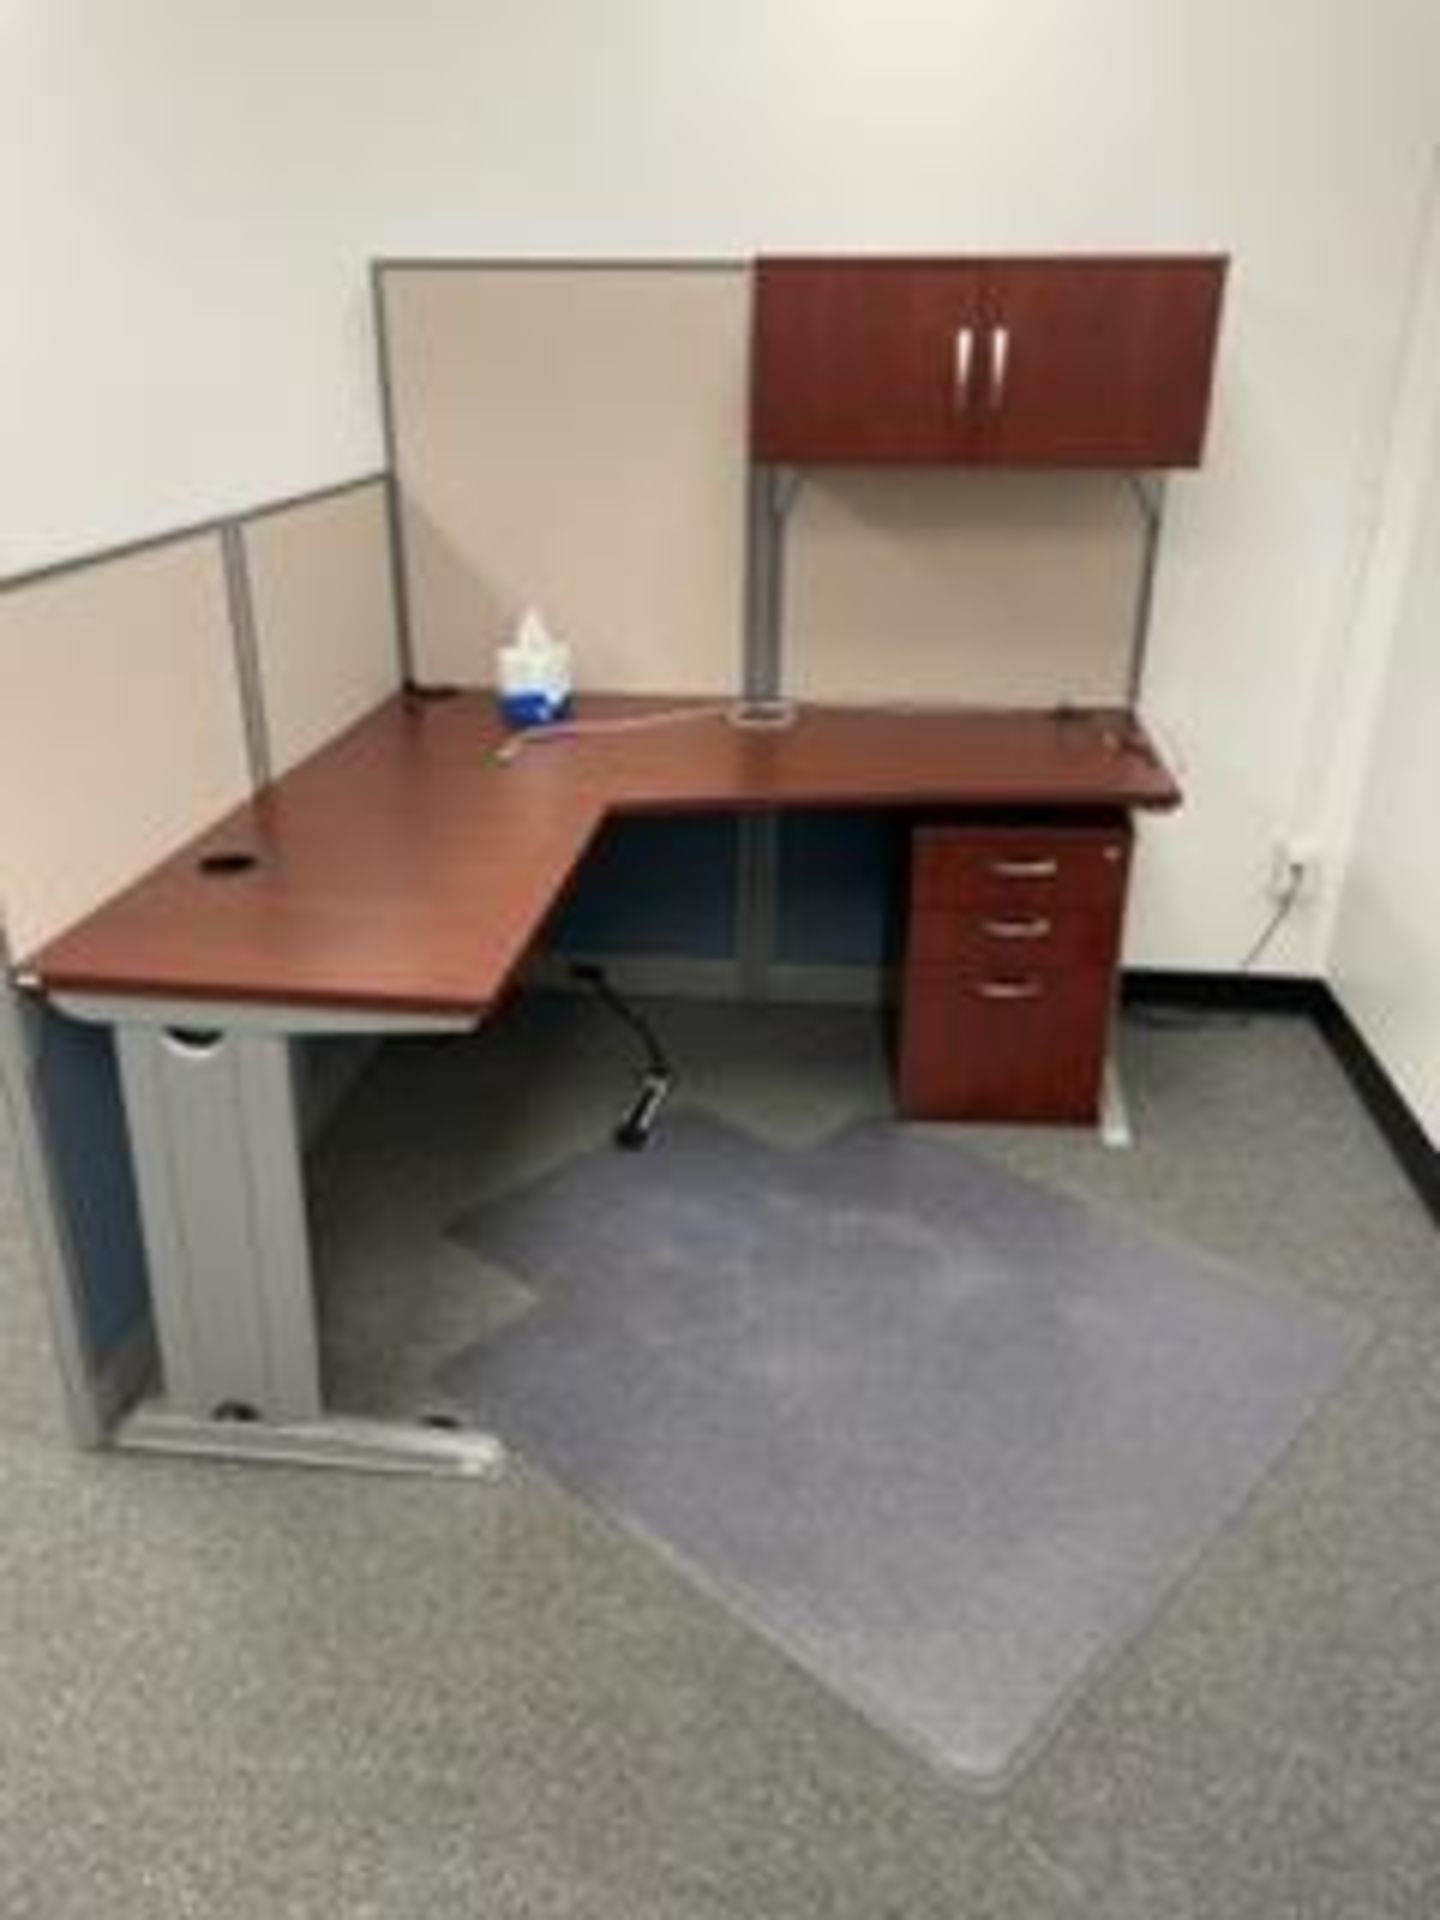 LOT OF ROOM with L shape cubical desk and chairs Rigging Fee: $ 200